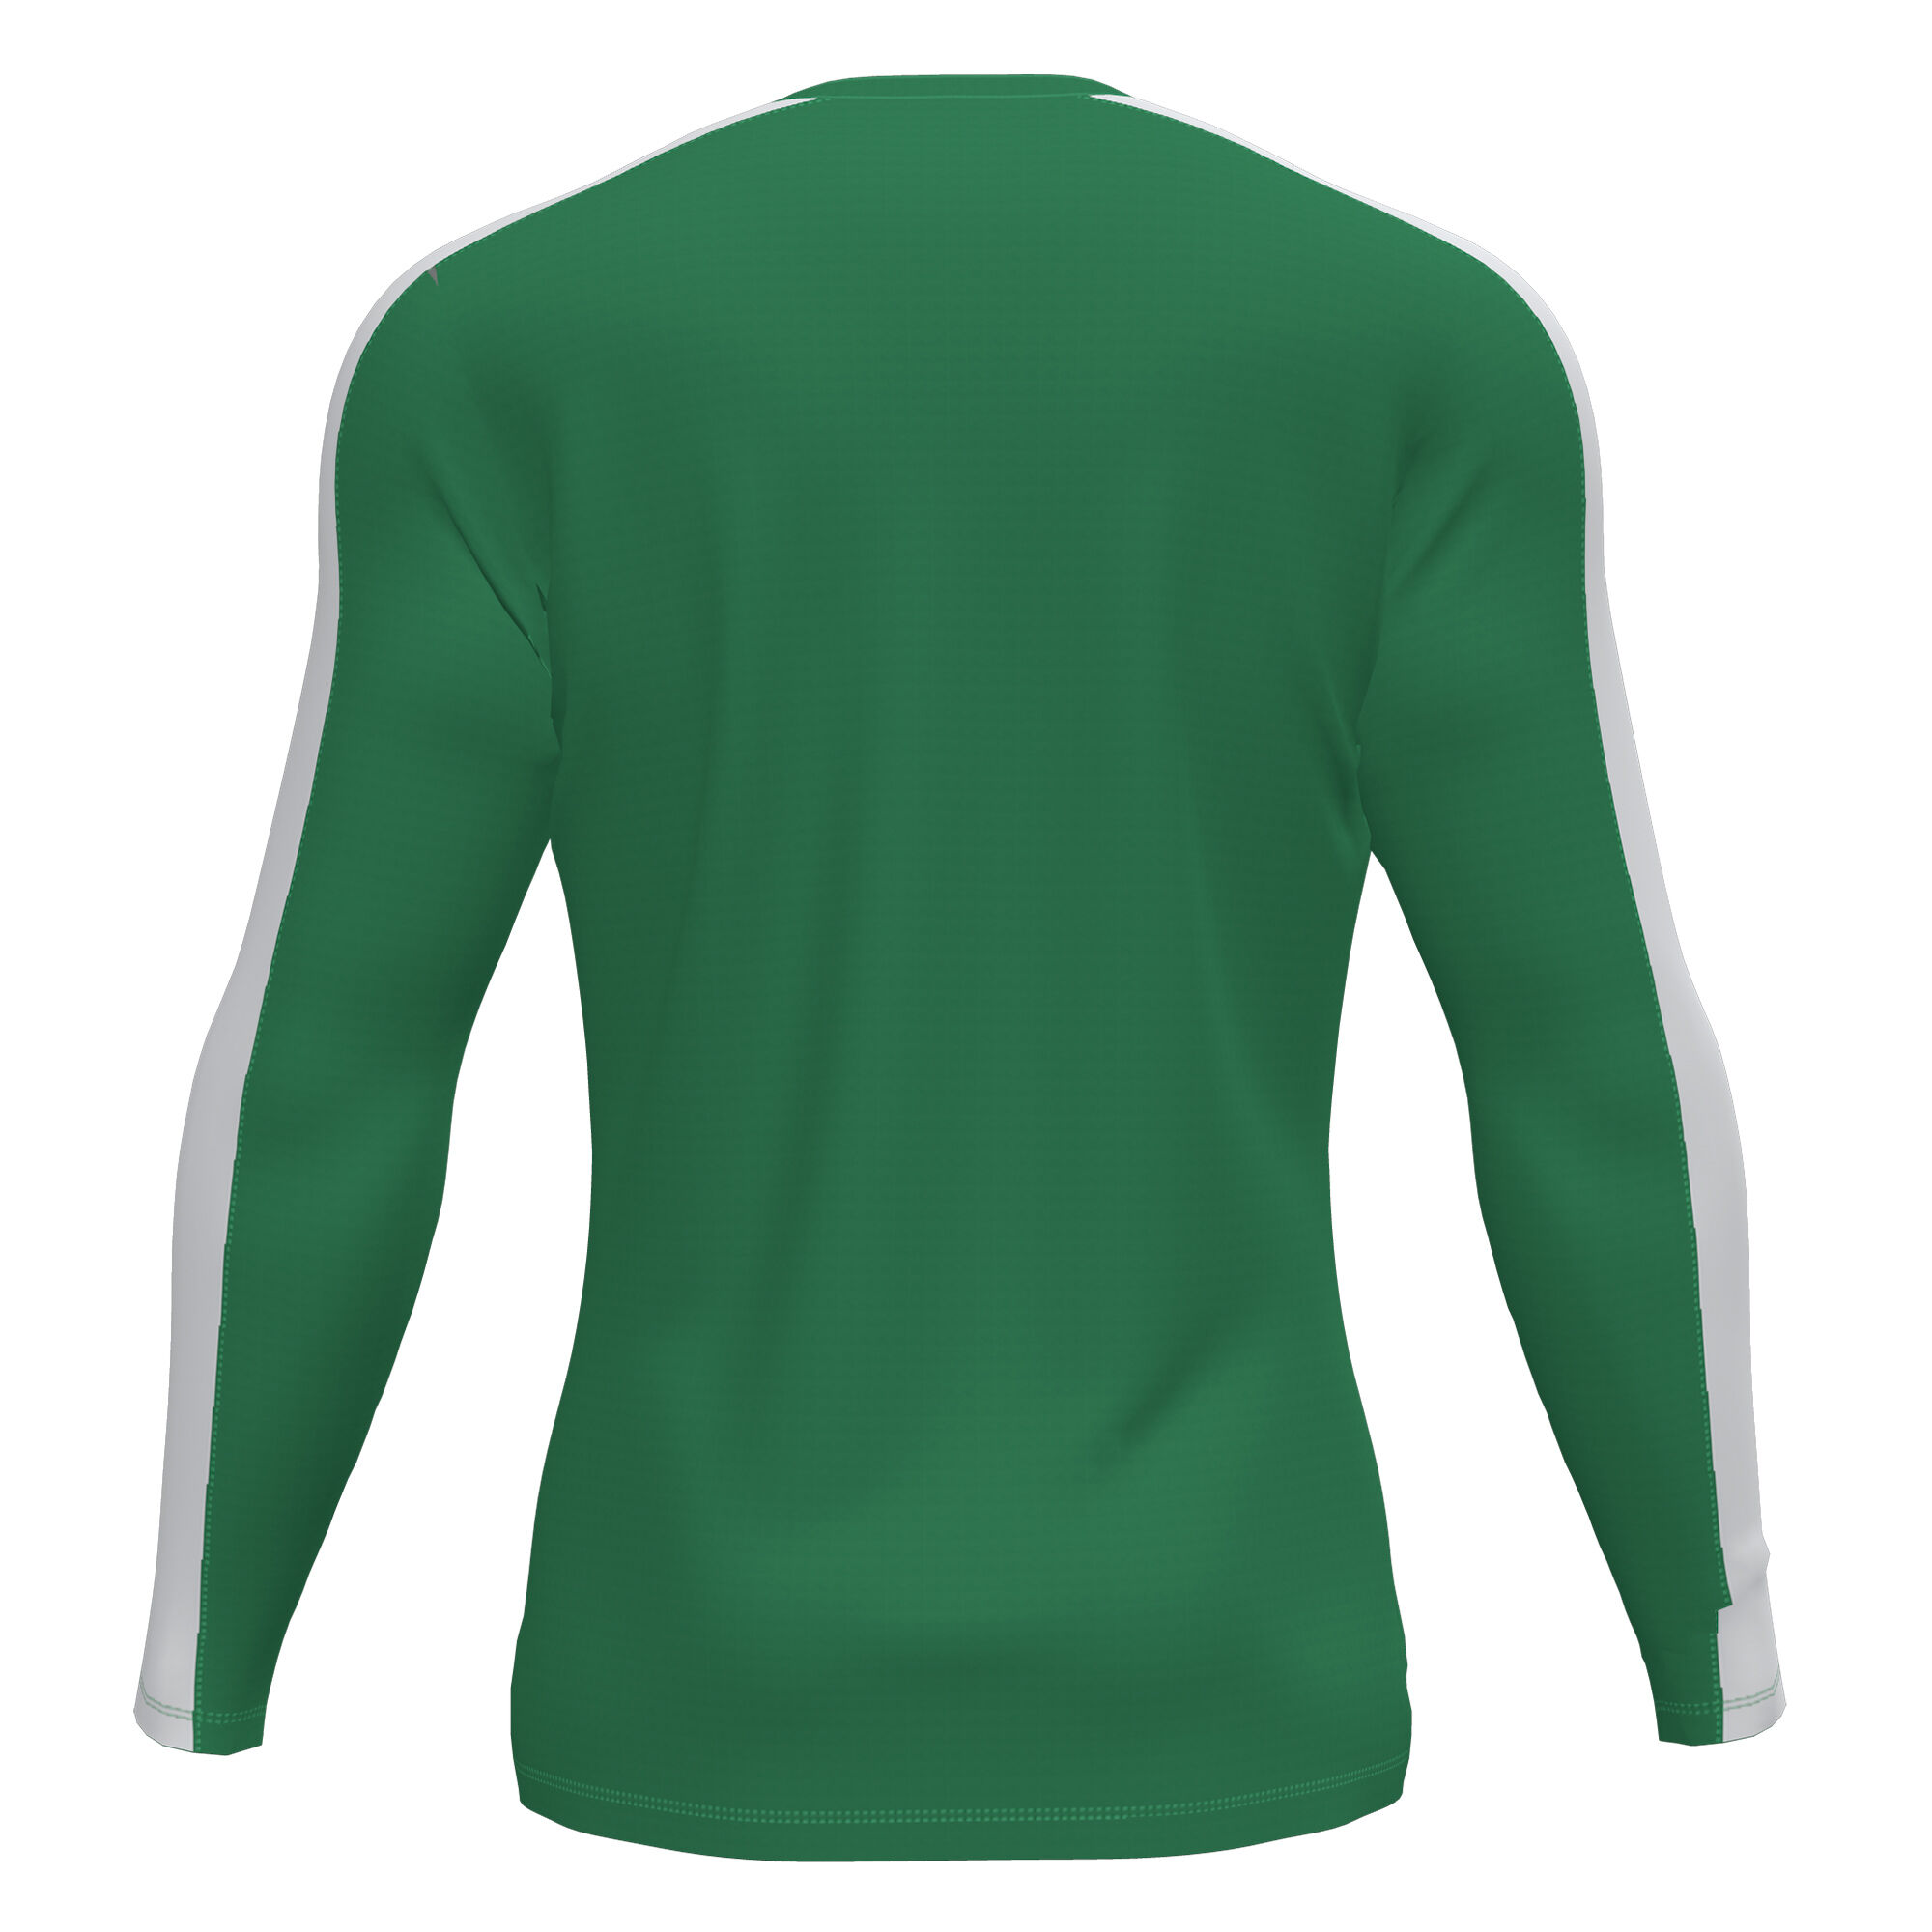 Maillot manches longues homme Academy III vert blanc